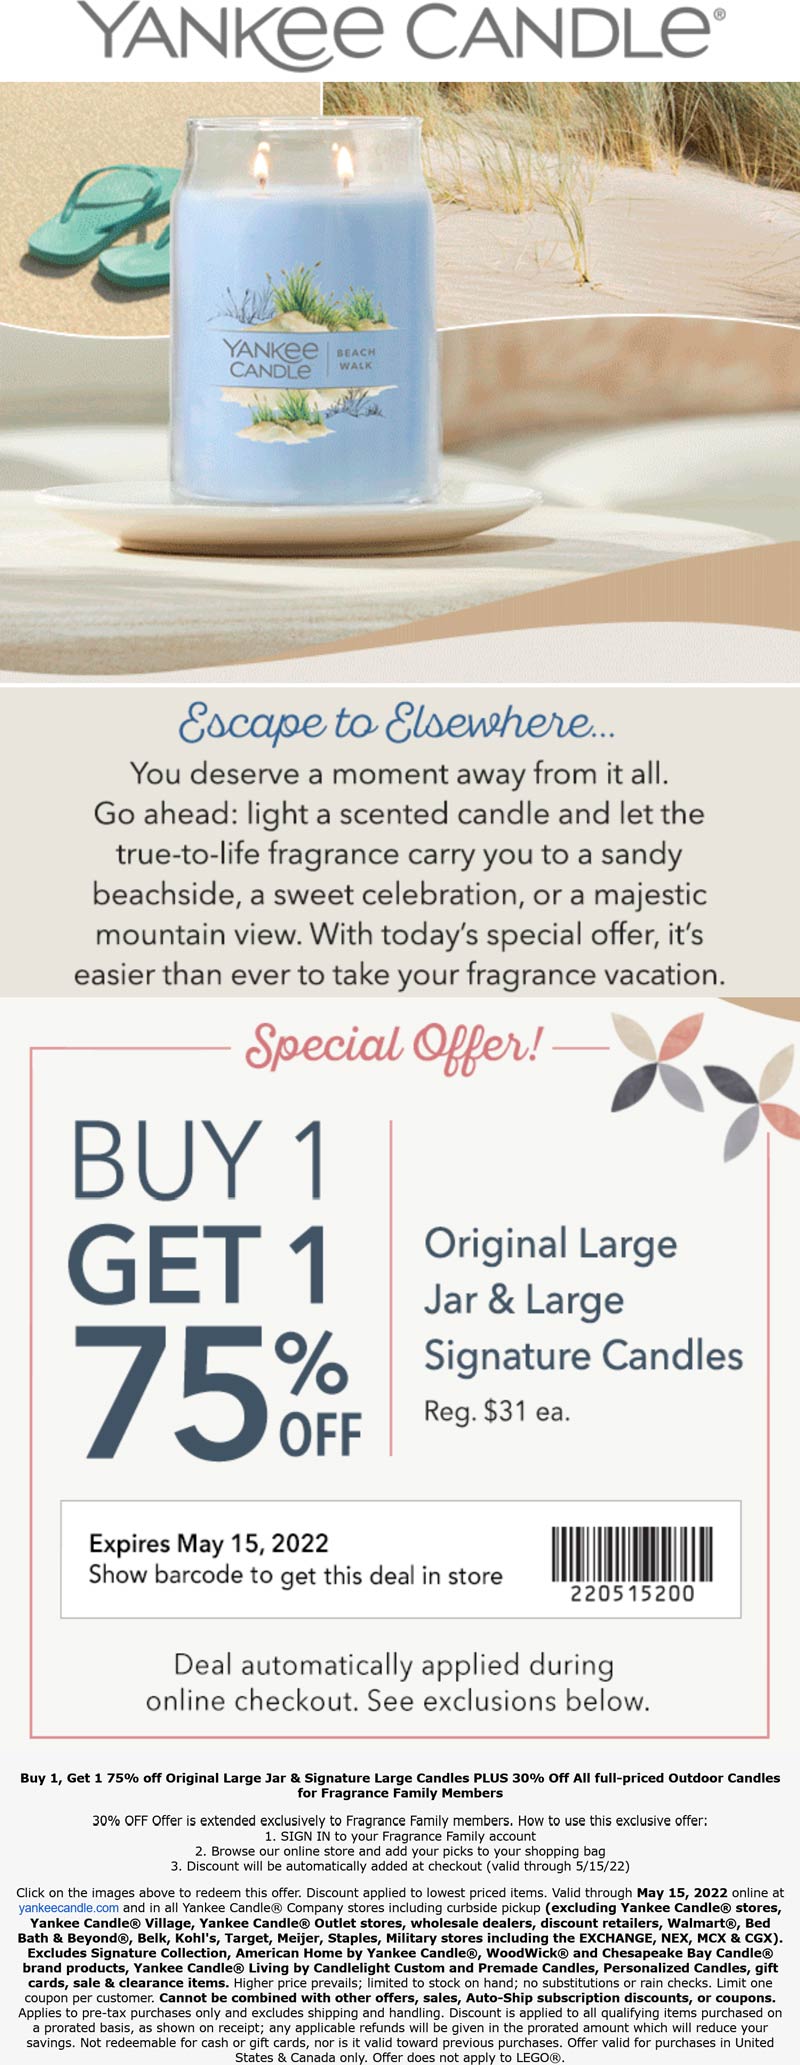 Yankee Candle coupons & promo code for [August 2022]